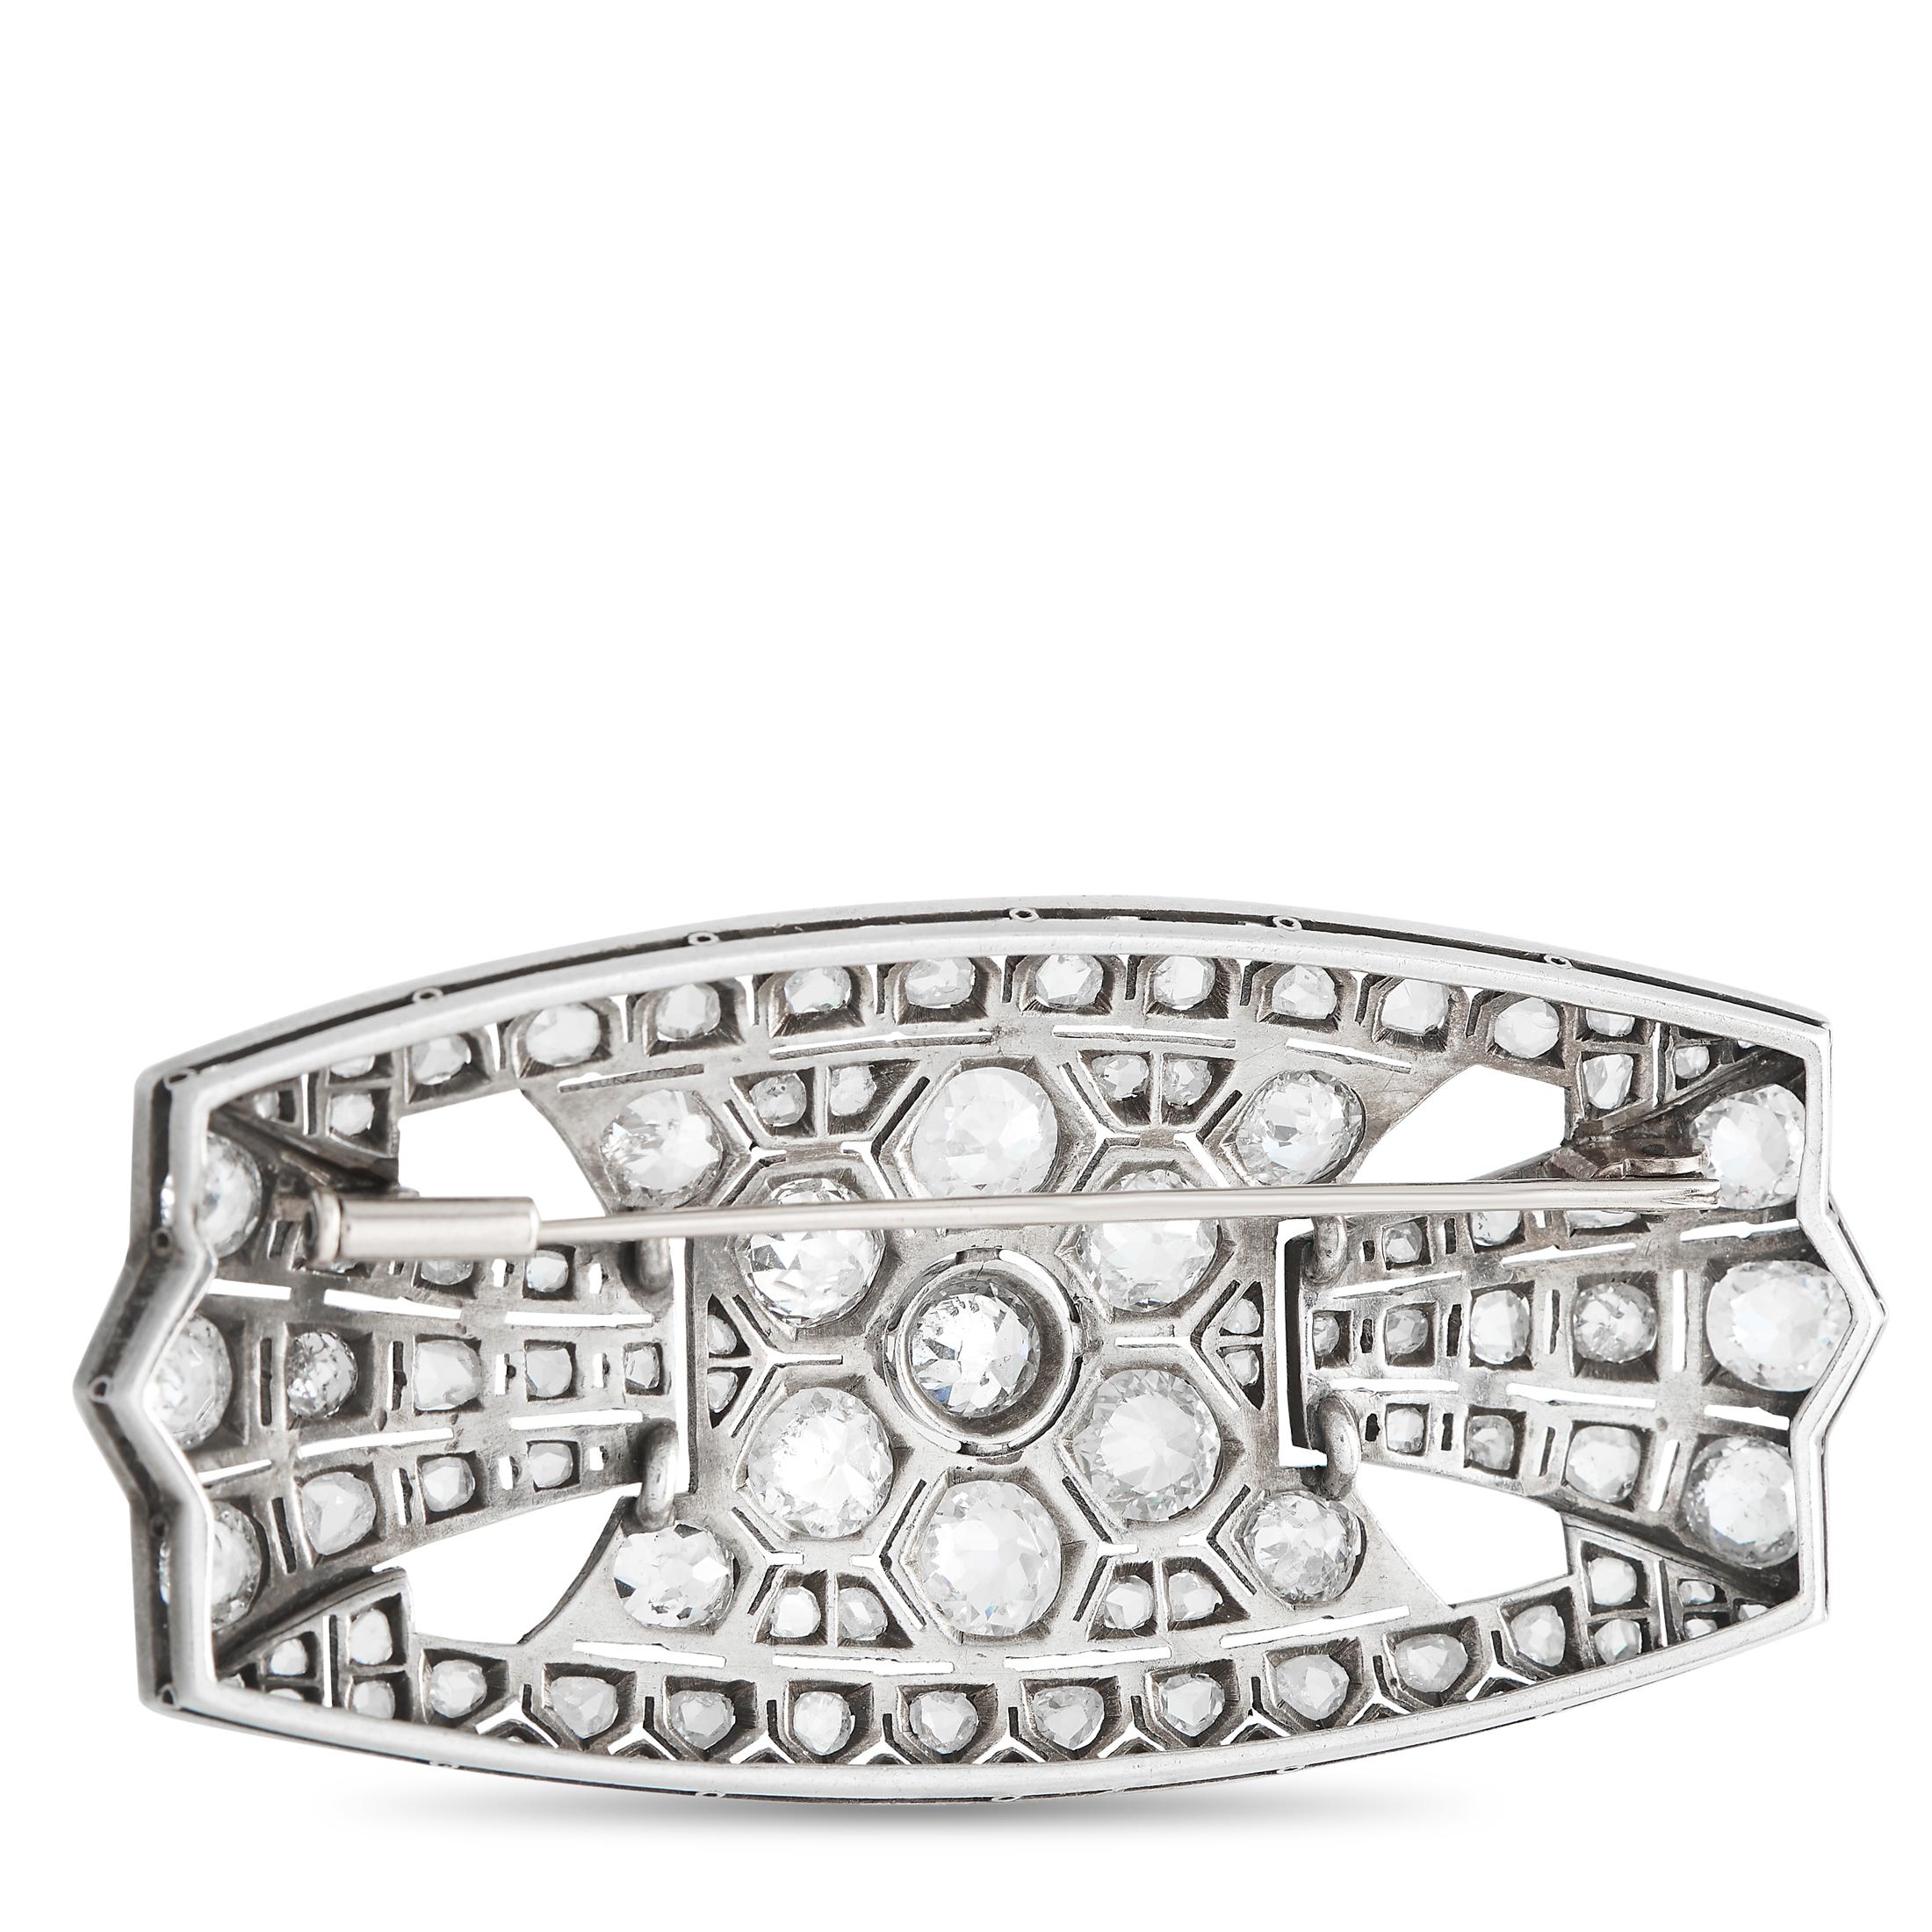 Platinum 10.0 ct Diamond Art Deco Brooch In Excellent Condition For Sale In Southampton, PA